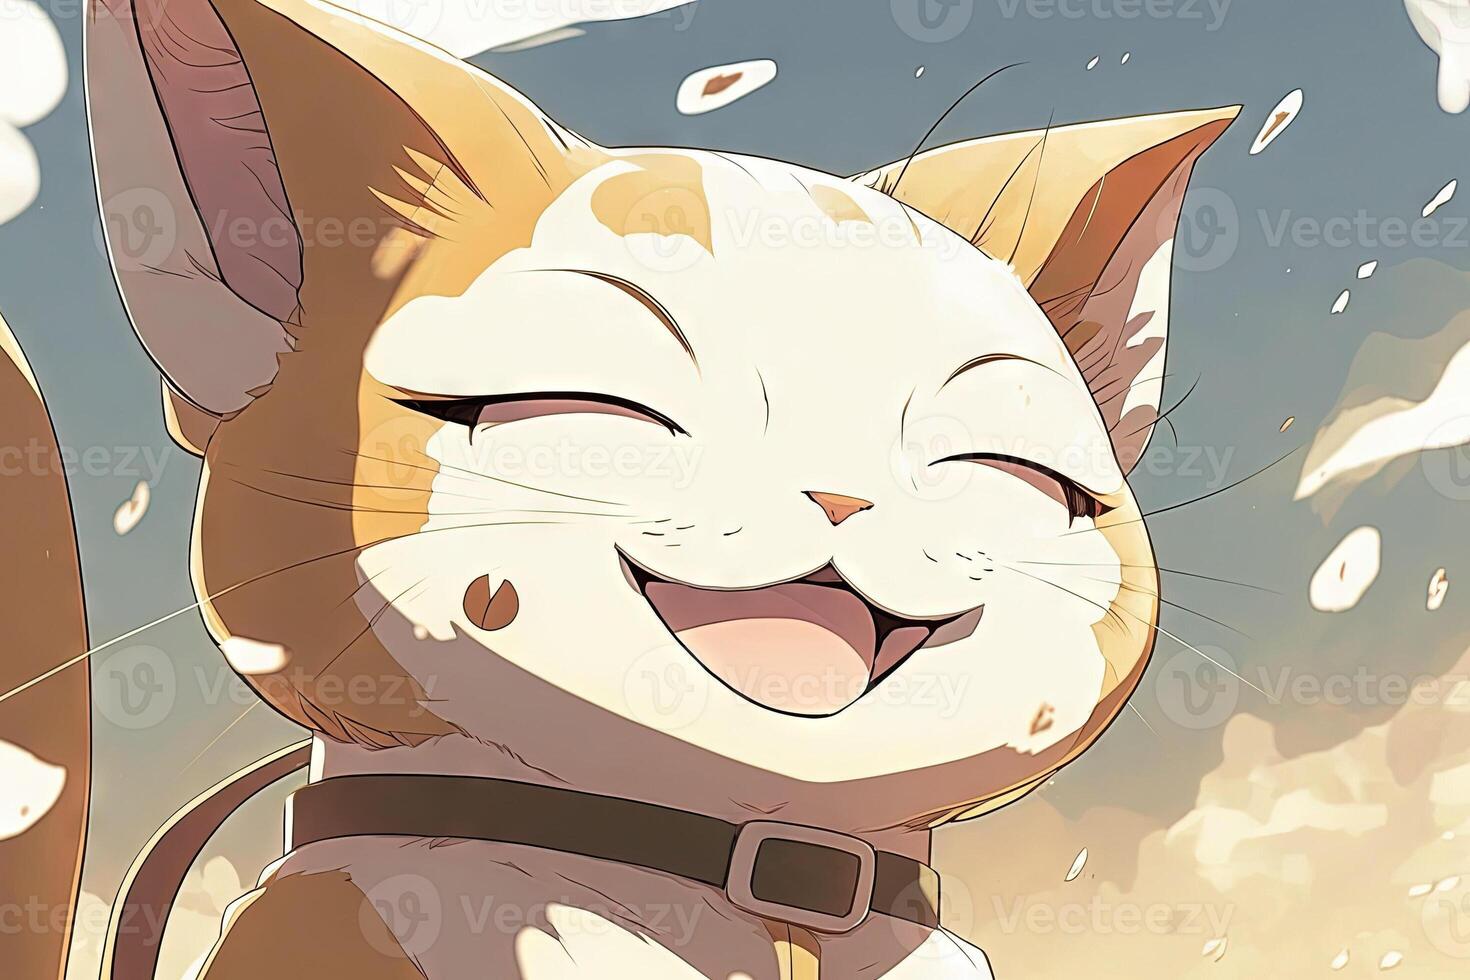 ANime smiling cat with happy expression illustration photo